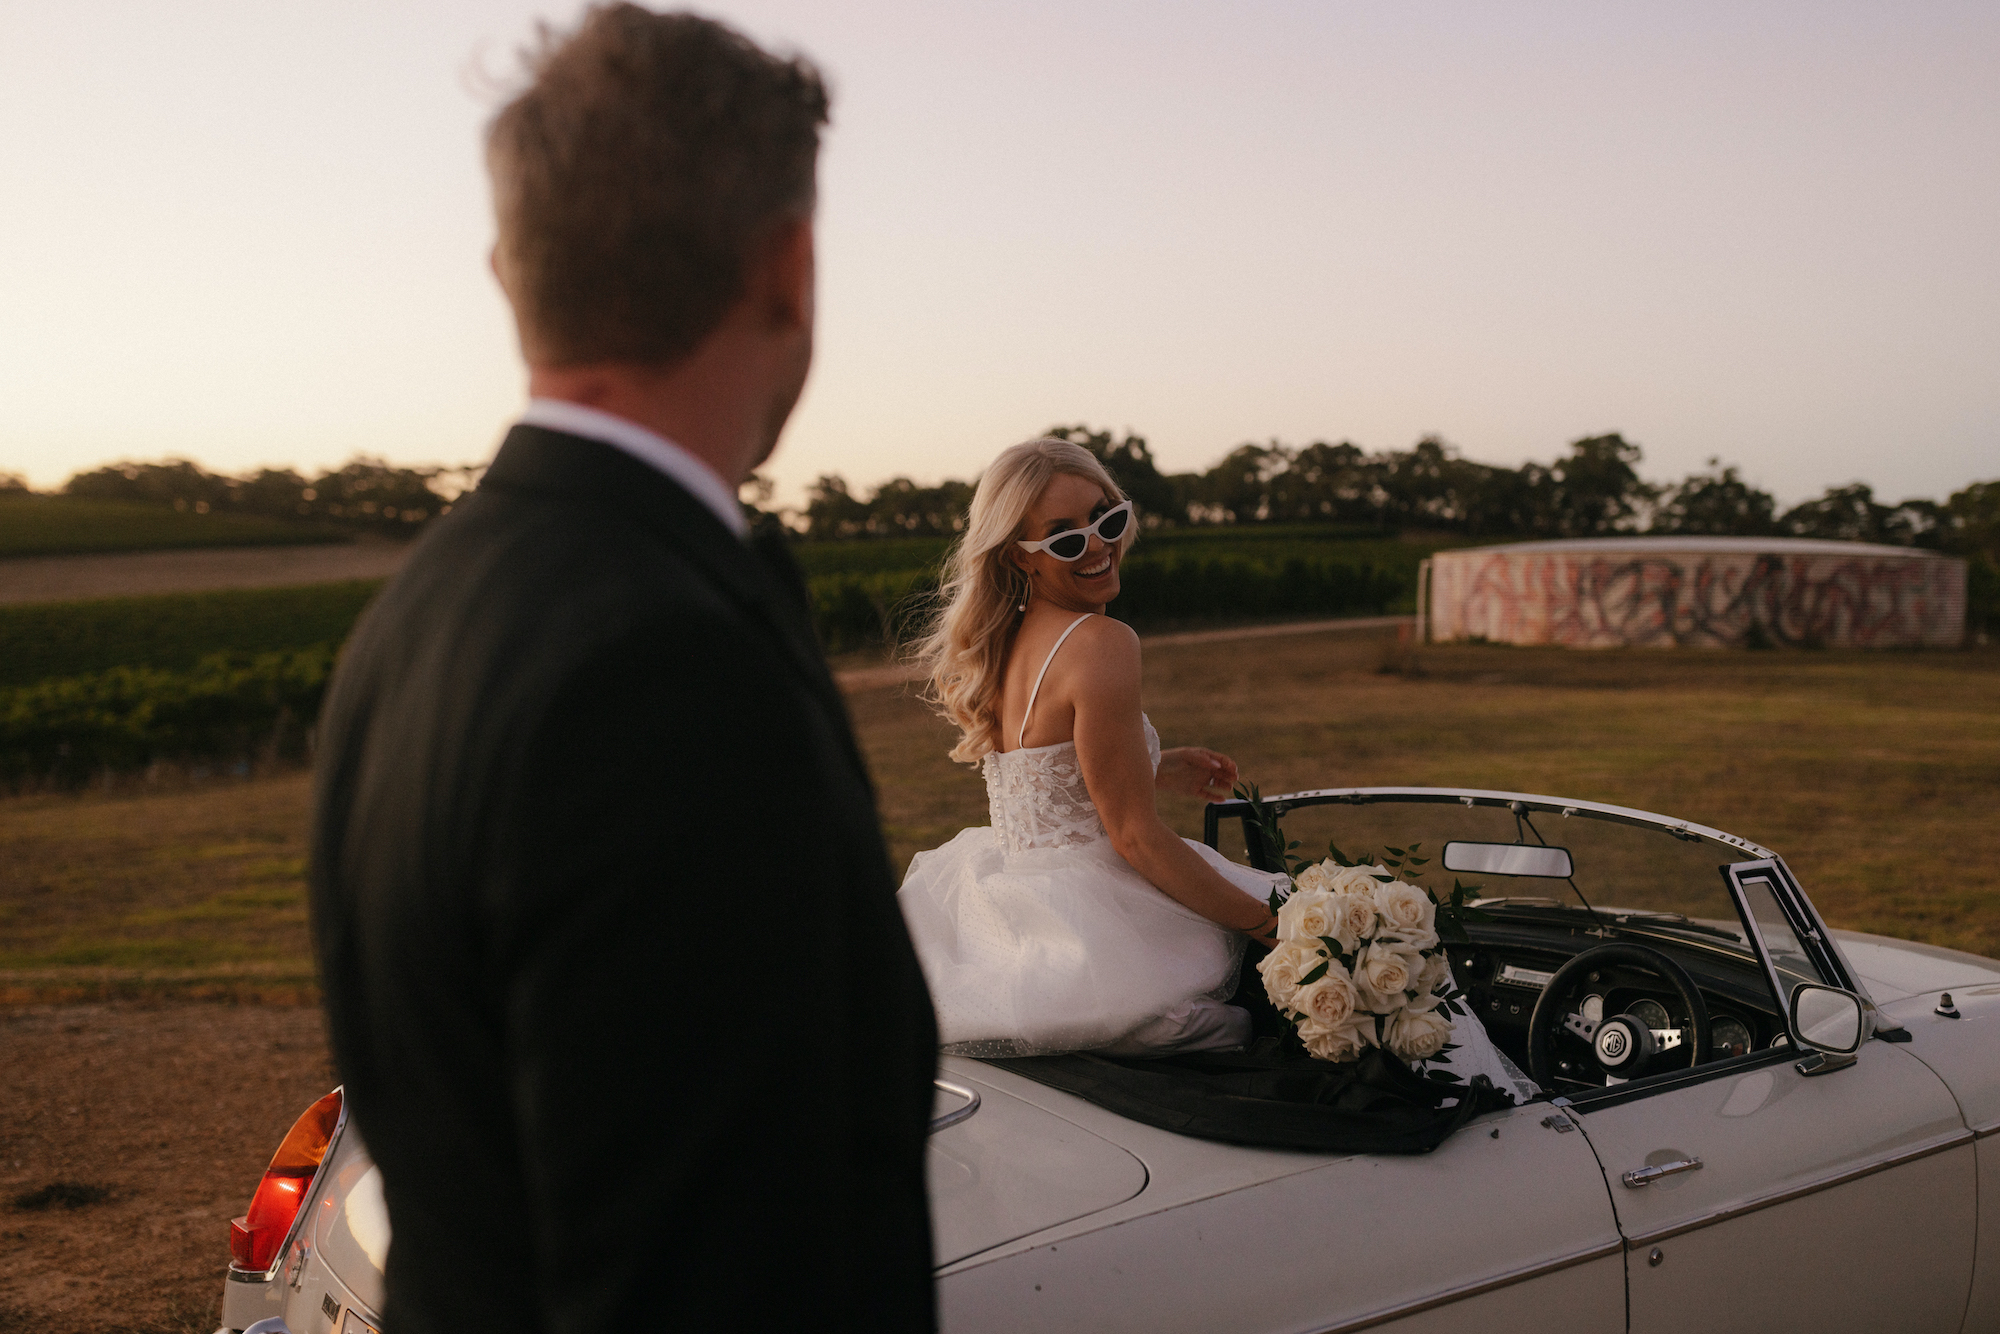 A heritage barn venue set amongst the rolling hills and vineyards of the Adelaide Hills, Longview is a spacious yet intimate wedding venue in Macclesfield with on-site accommodation, day spa and food and beverage packages to suit.